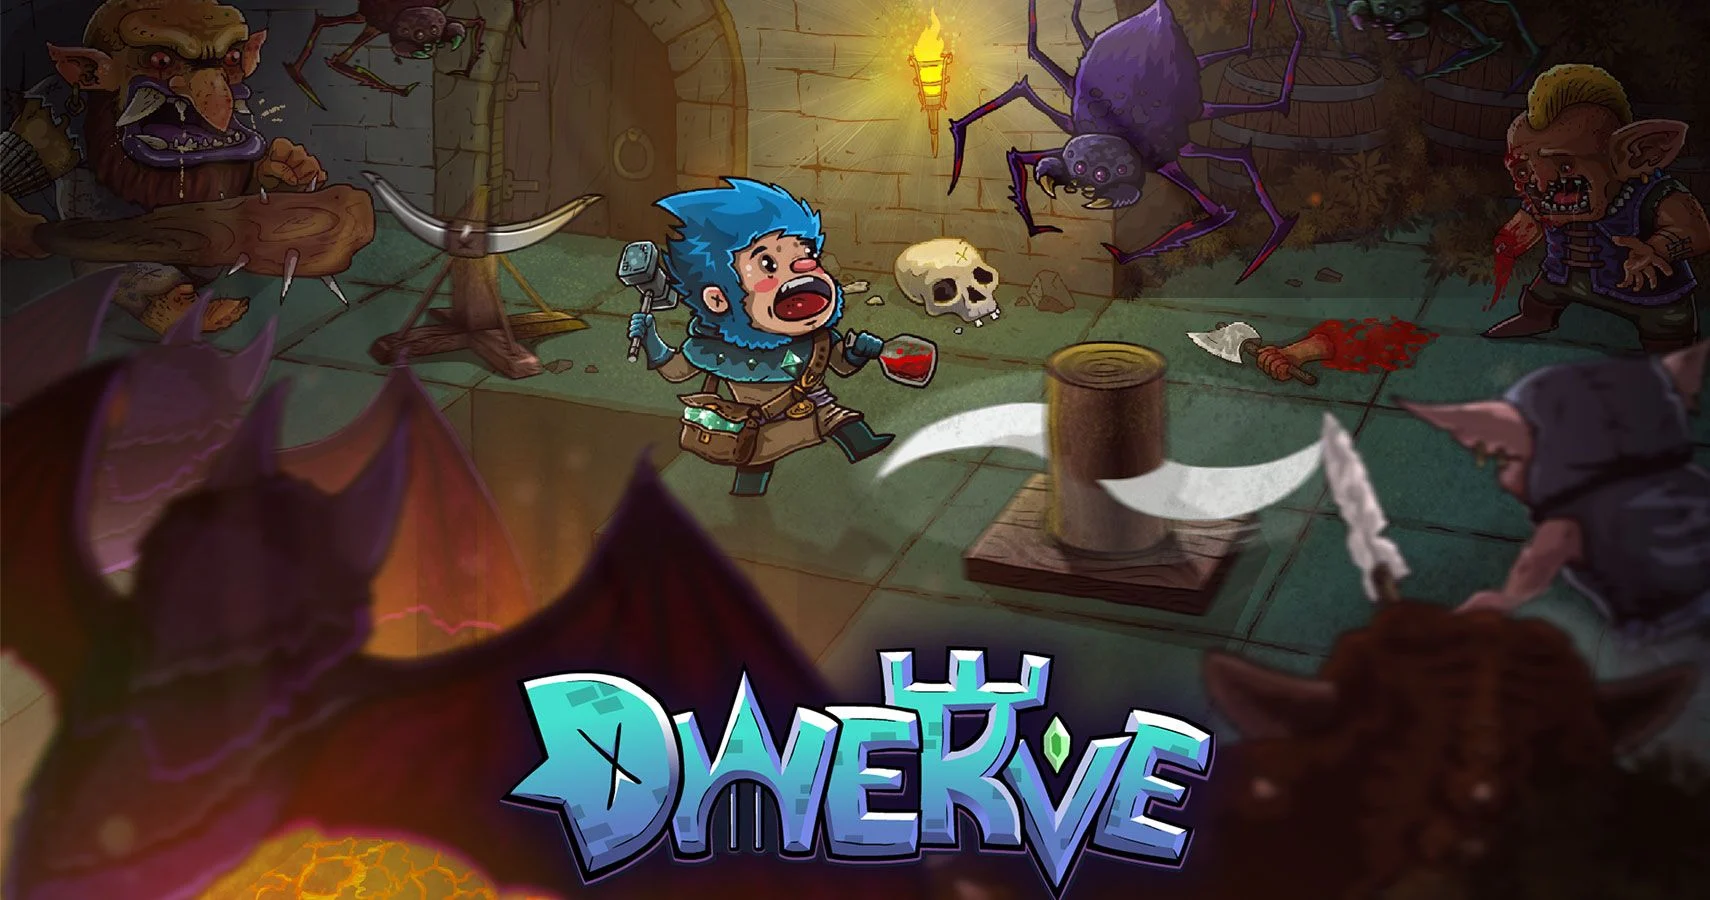 Dwerve Video Game Indie Game Fans news